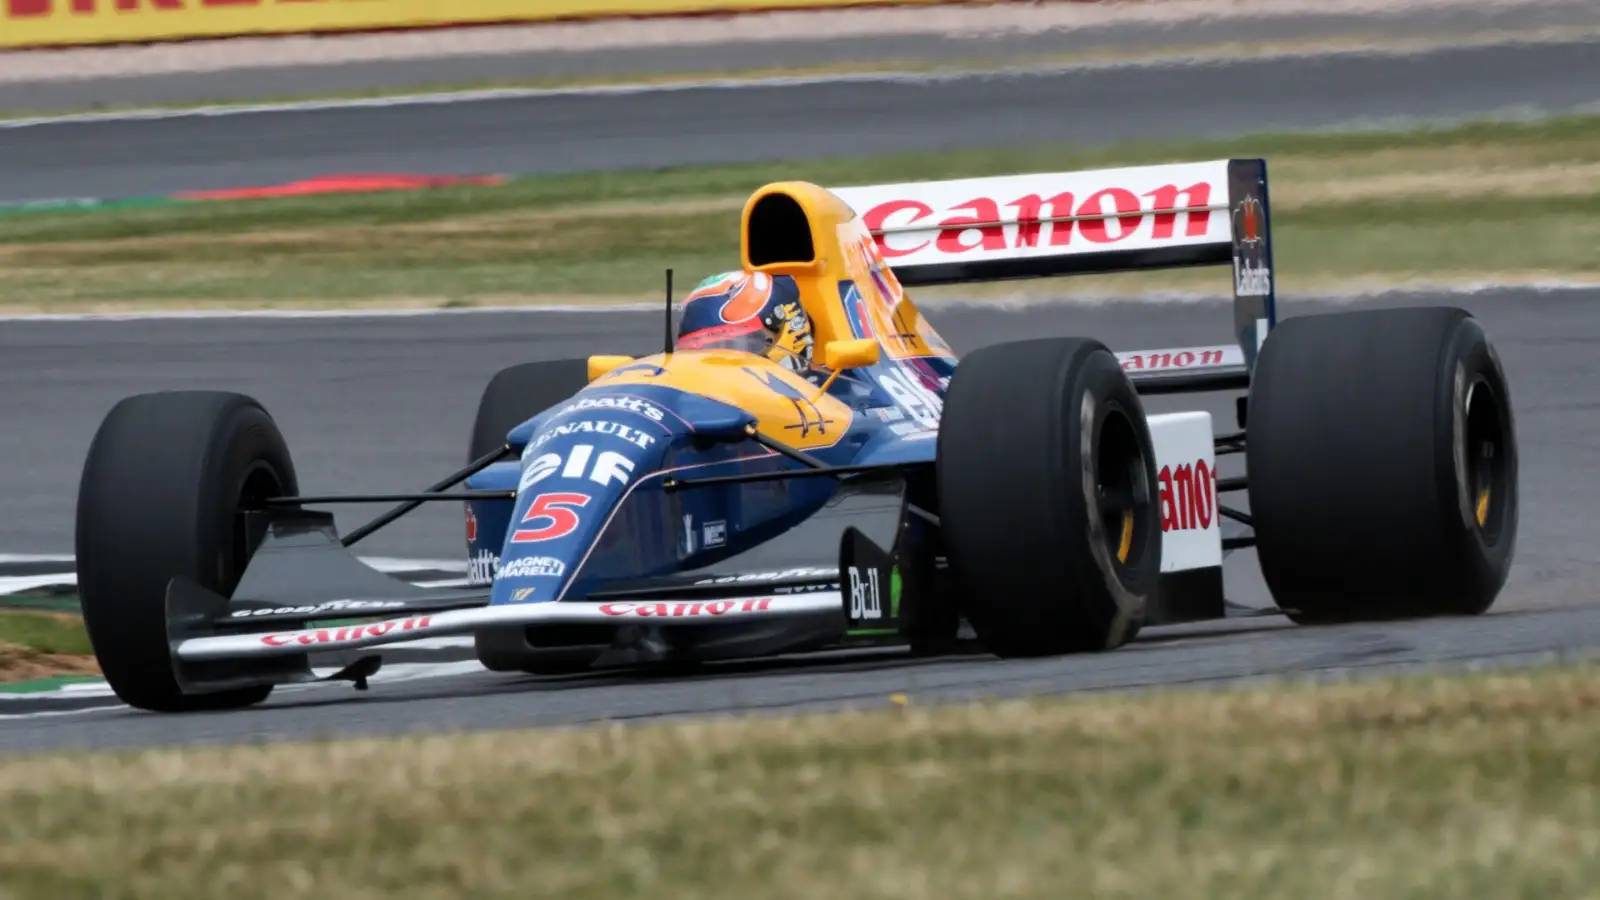 Williams FW14B: One of the greatest F1 cars of all time